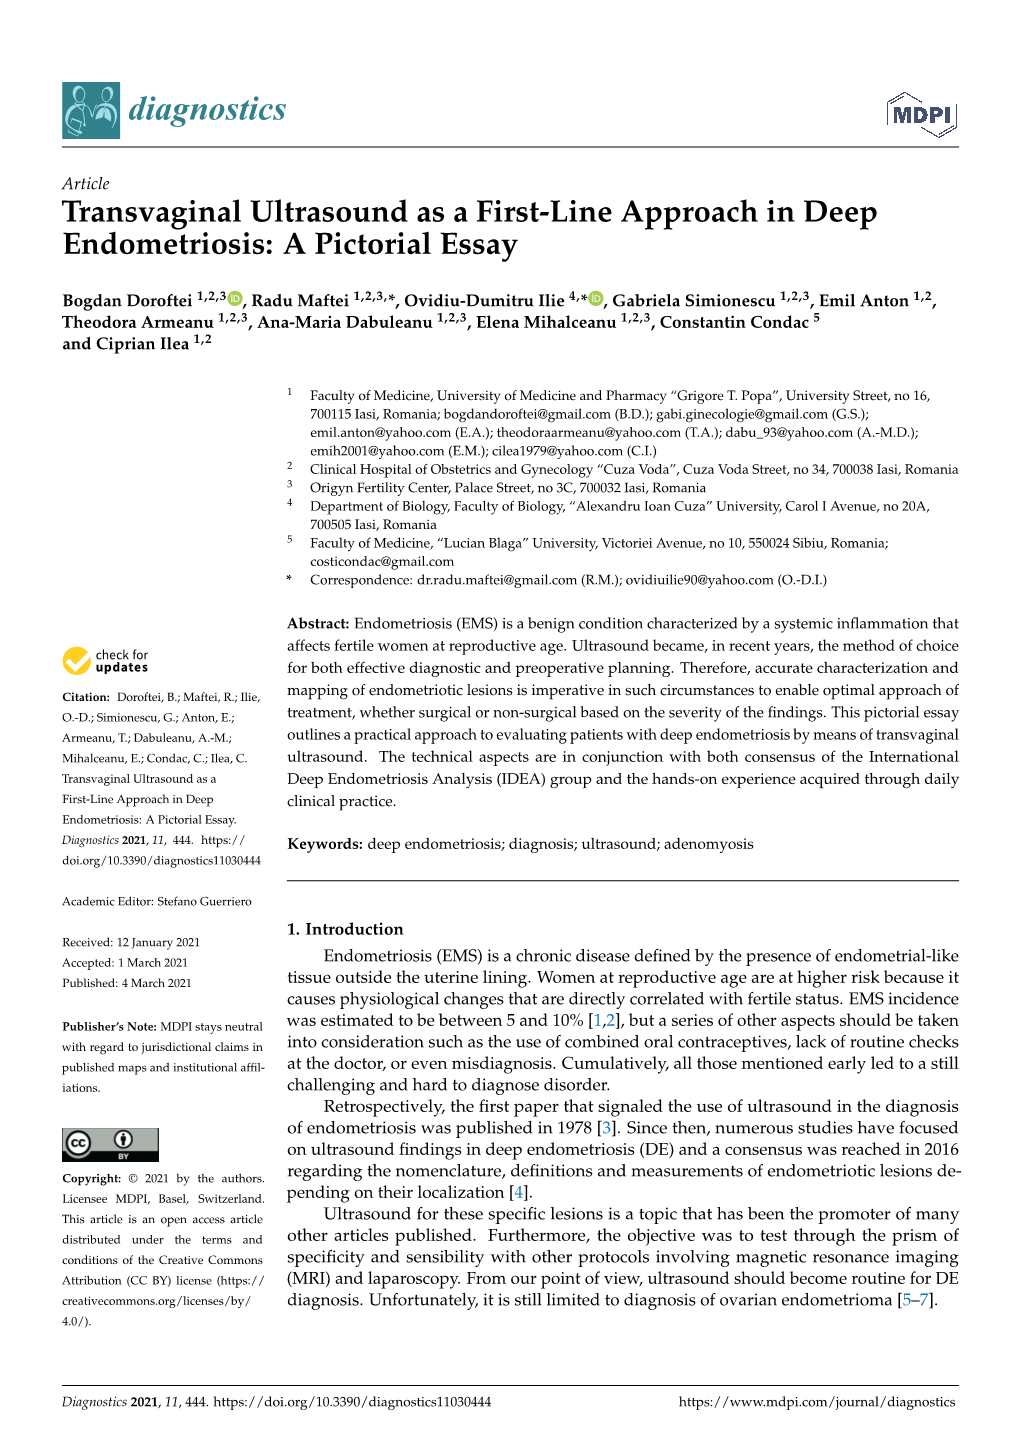 Transvaginal Ultrasound As a First-Line Approach in Deep Endometriosis: a Pictorial Essay